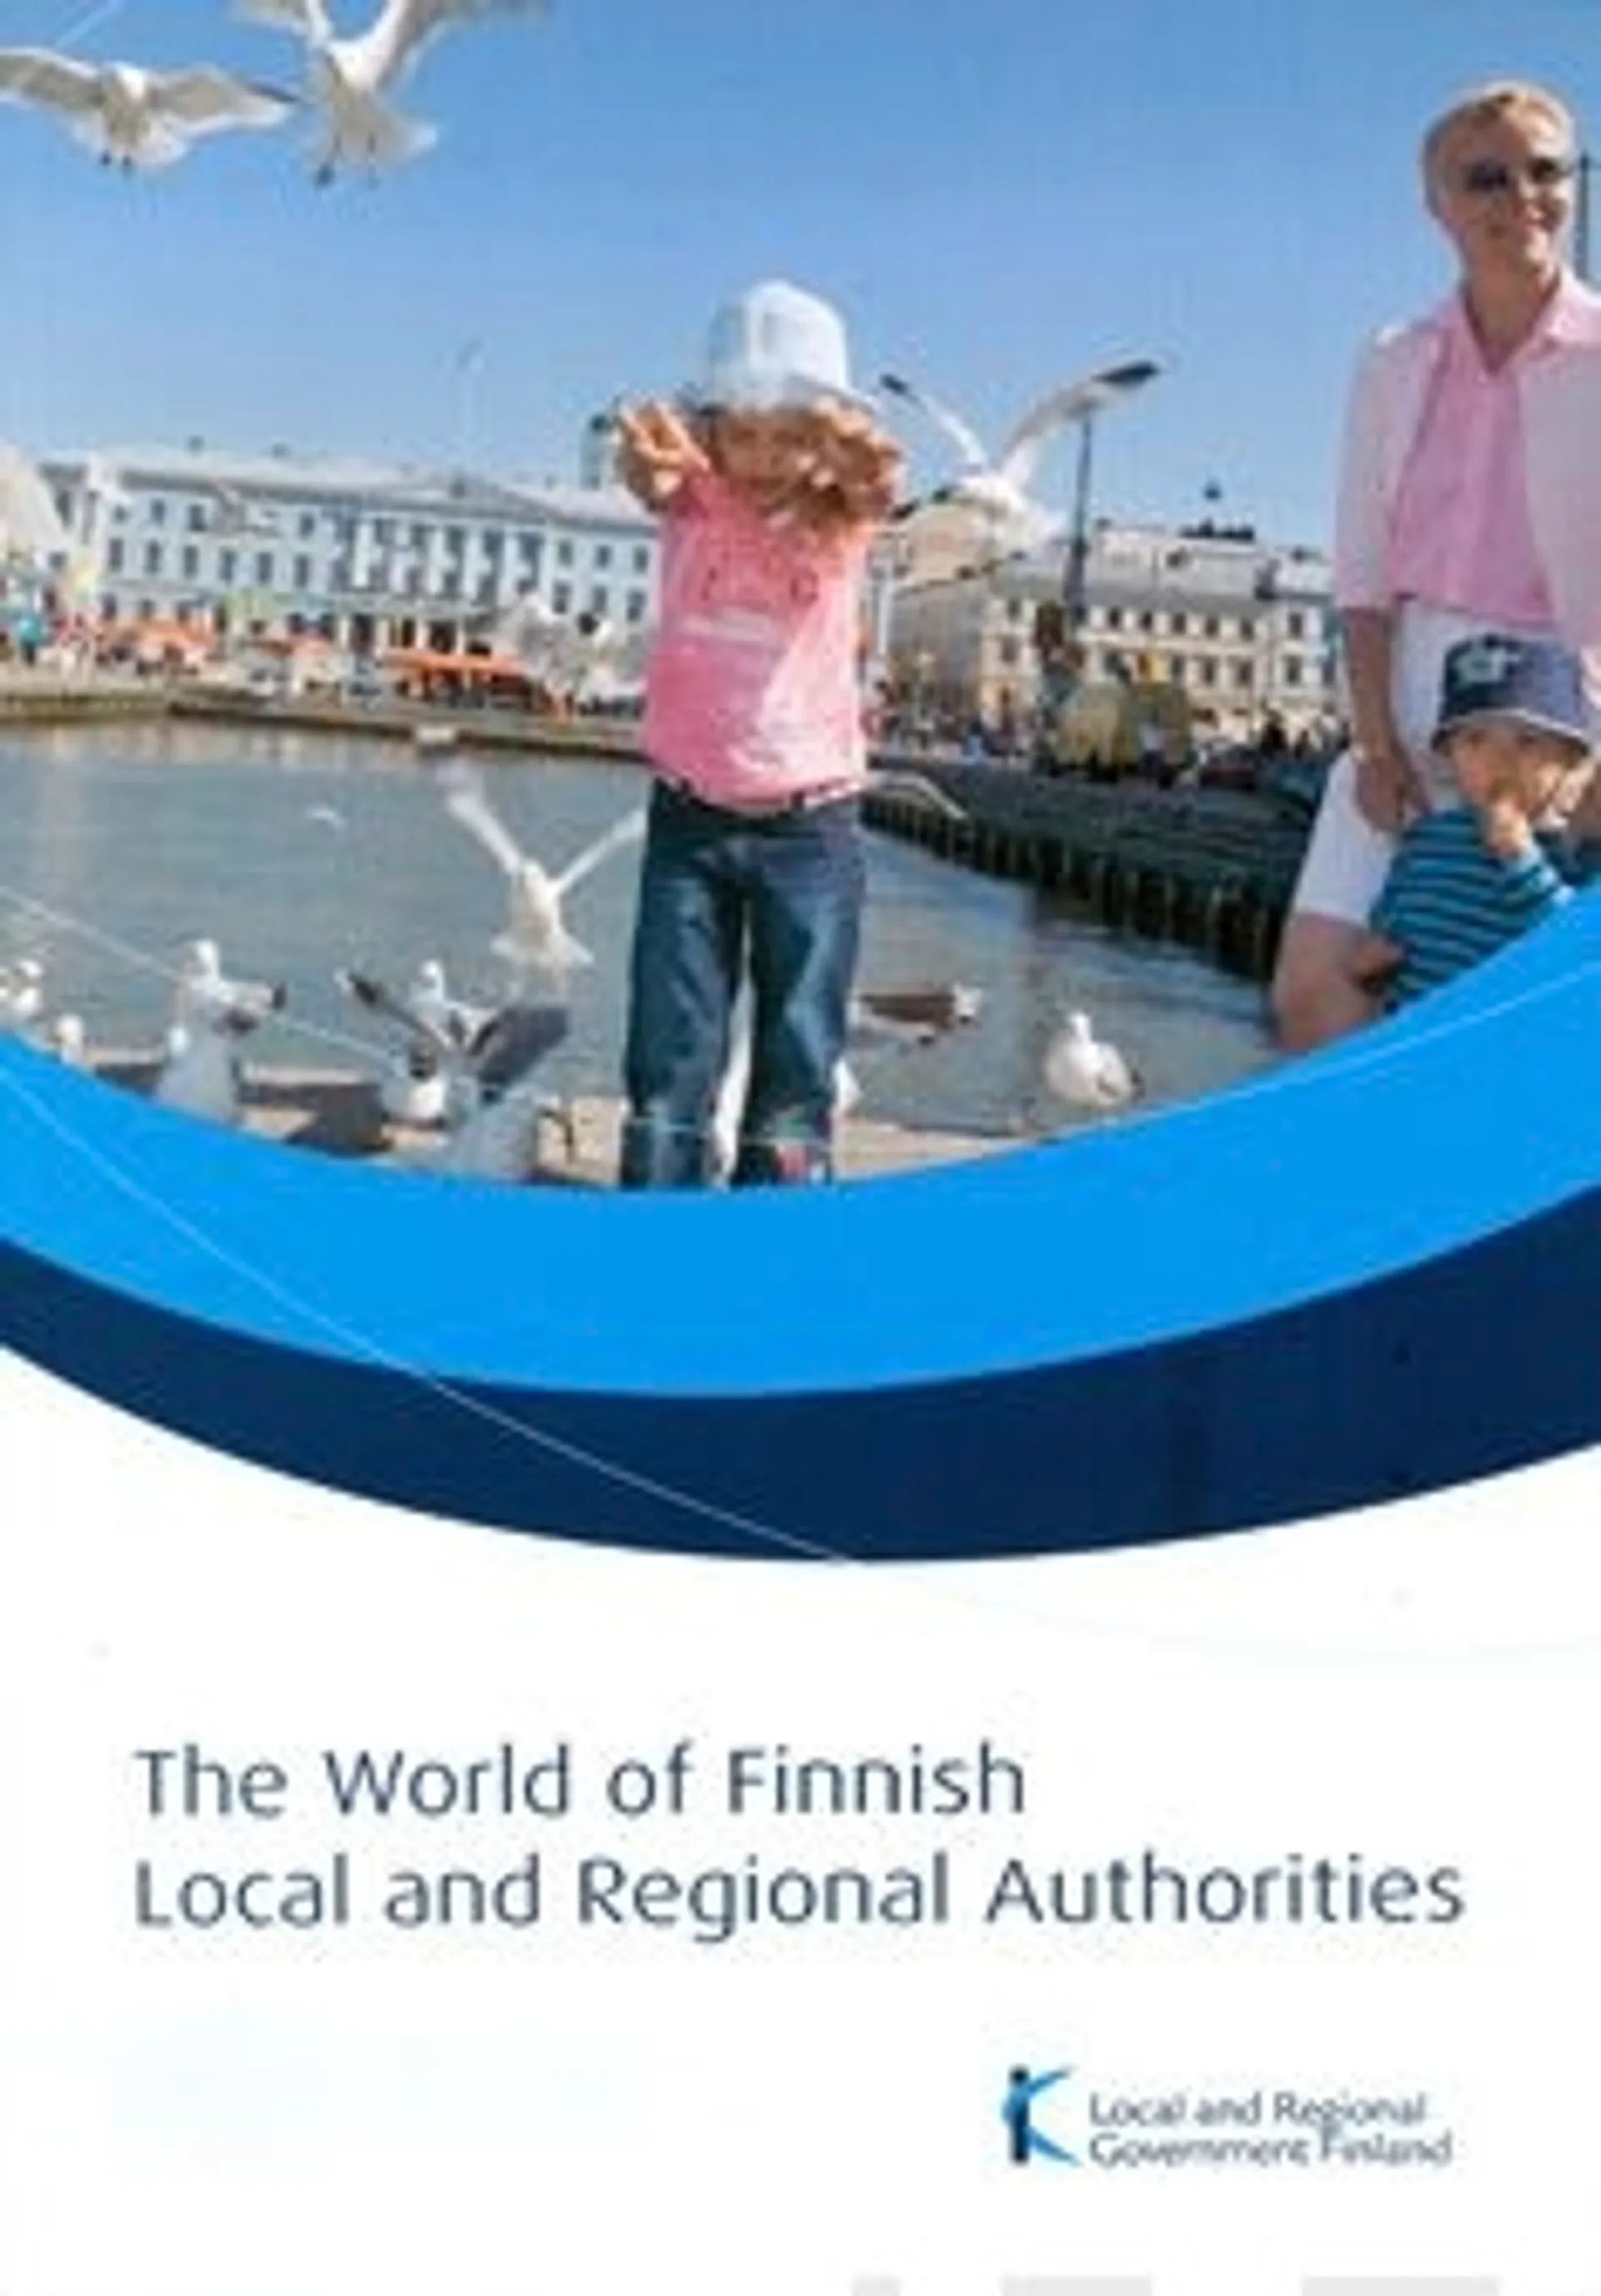 The World of Finnish Local and Regional Authorities